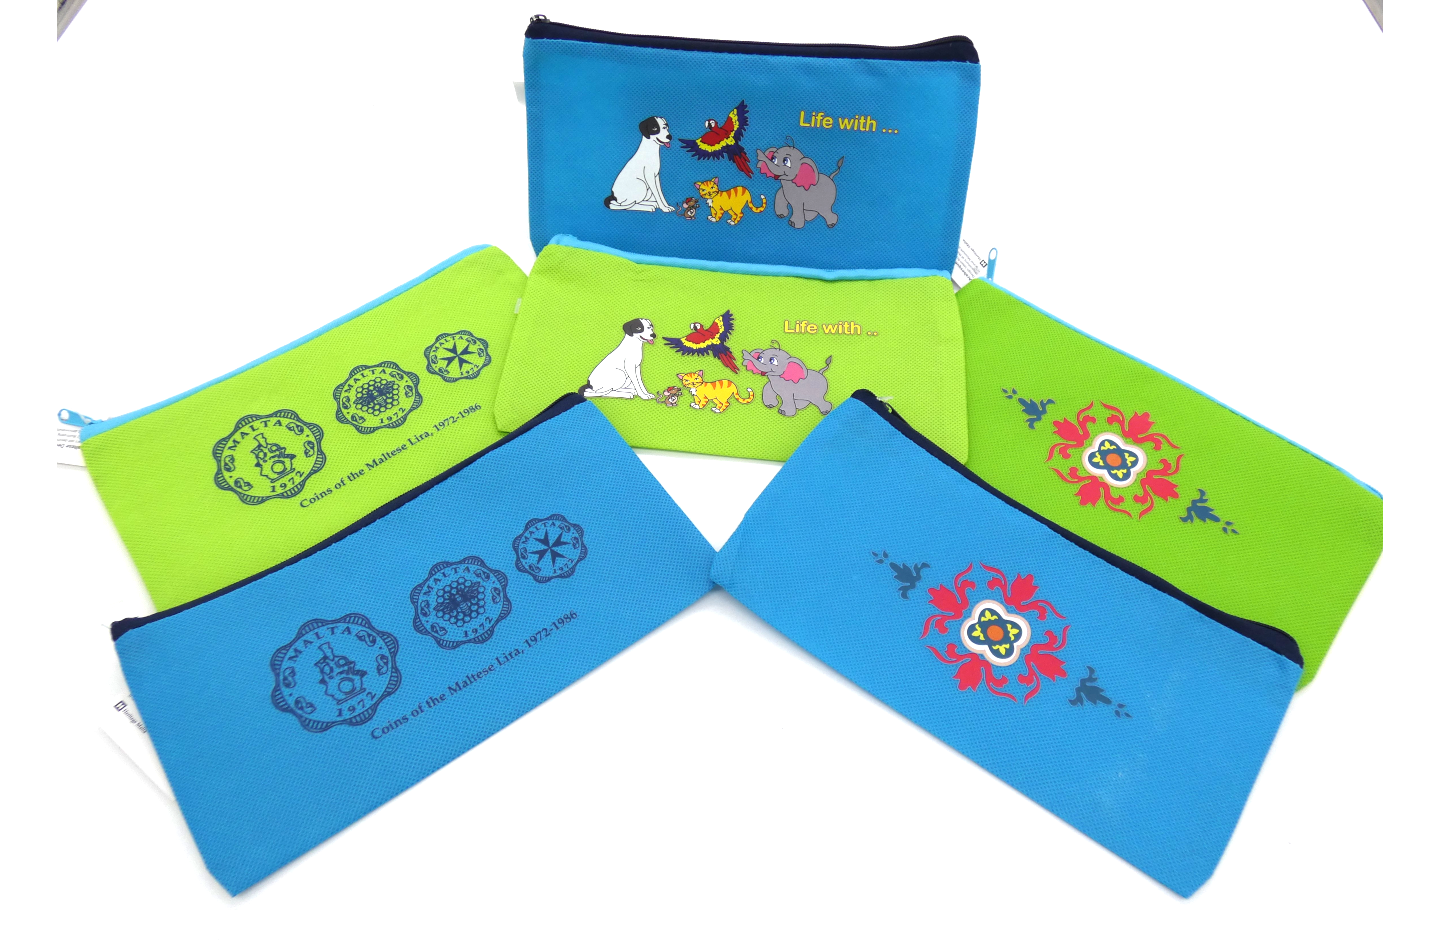 H.M. Pencil Cases – Offer: Buy 2 and get the 3rd case for free.